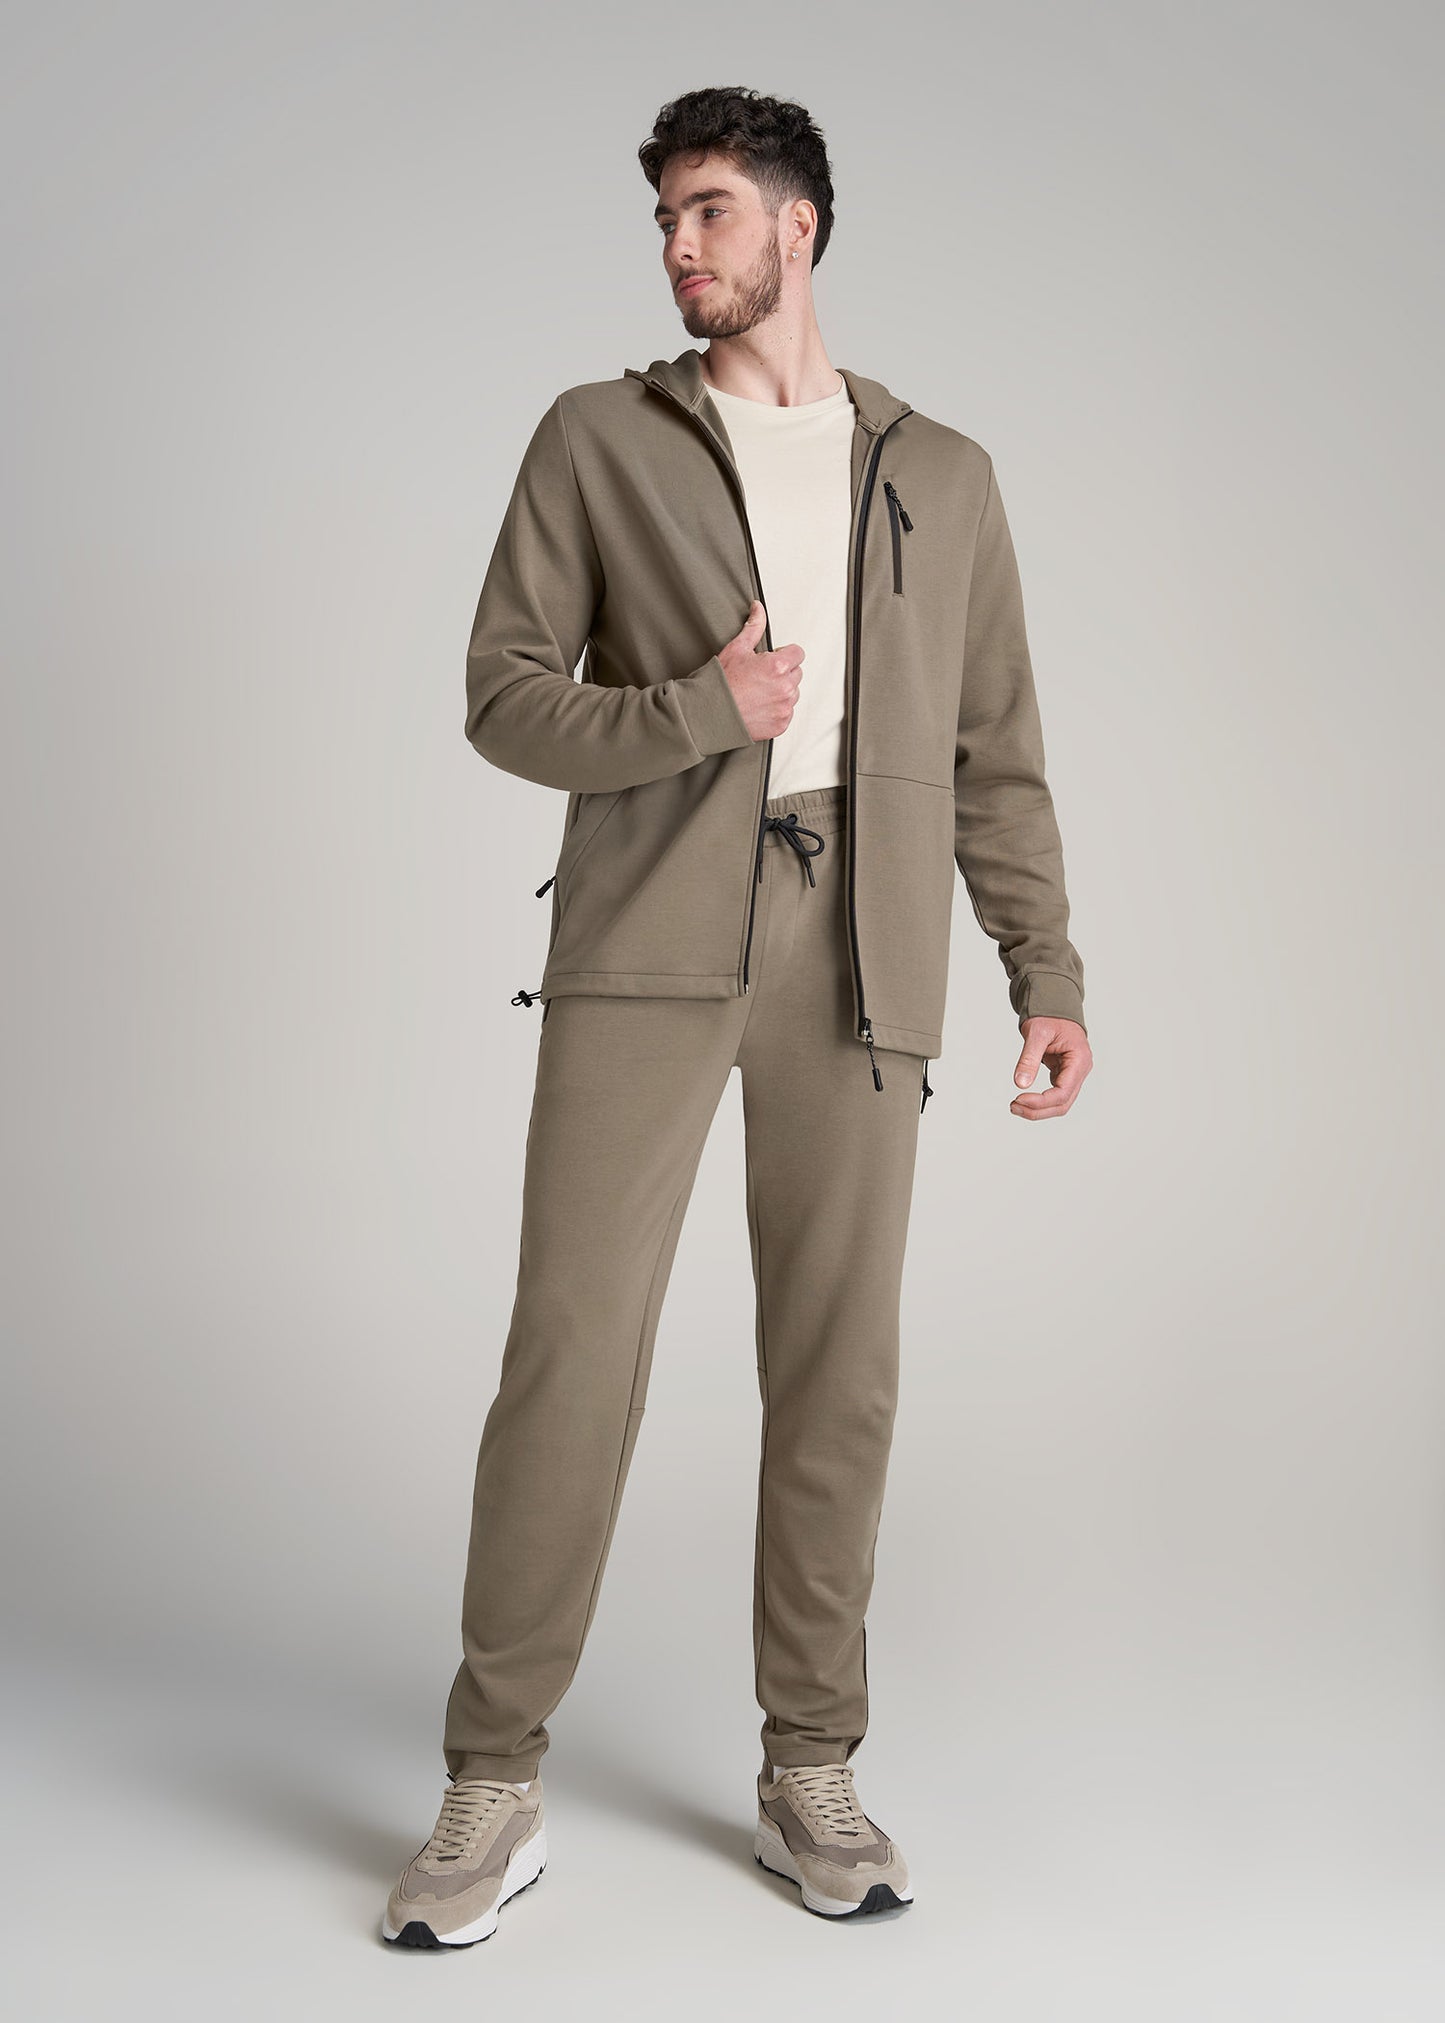       American-Tall-Men-Athleisure-Performance-Pant-Deep-Taupe-full